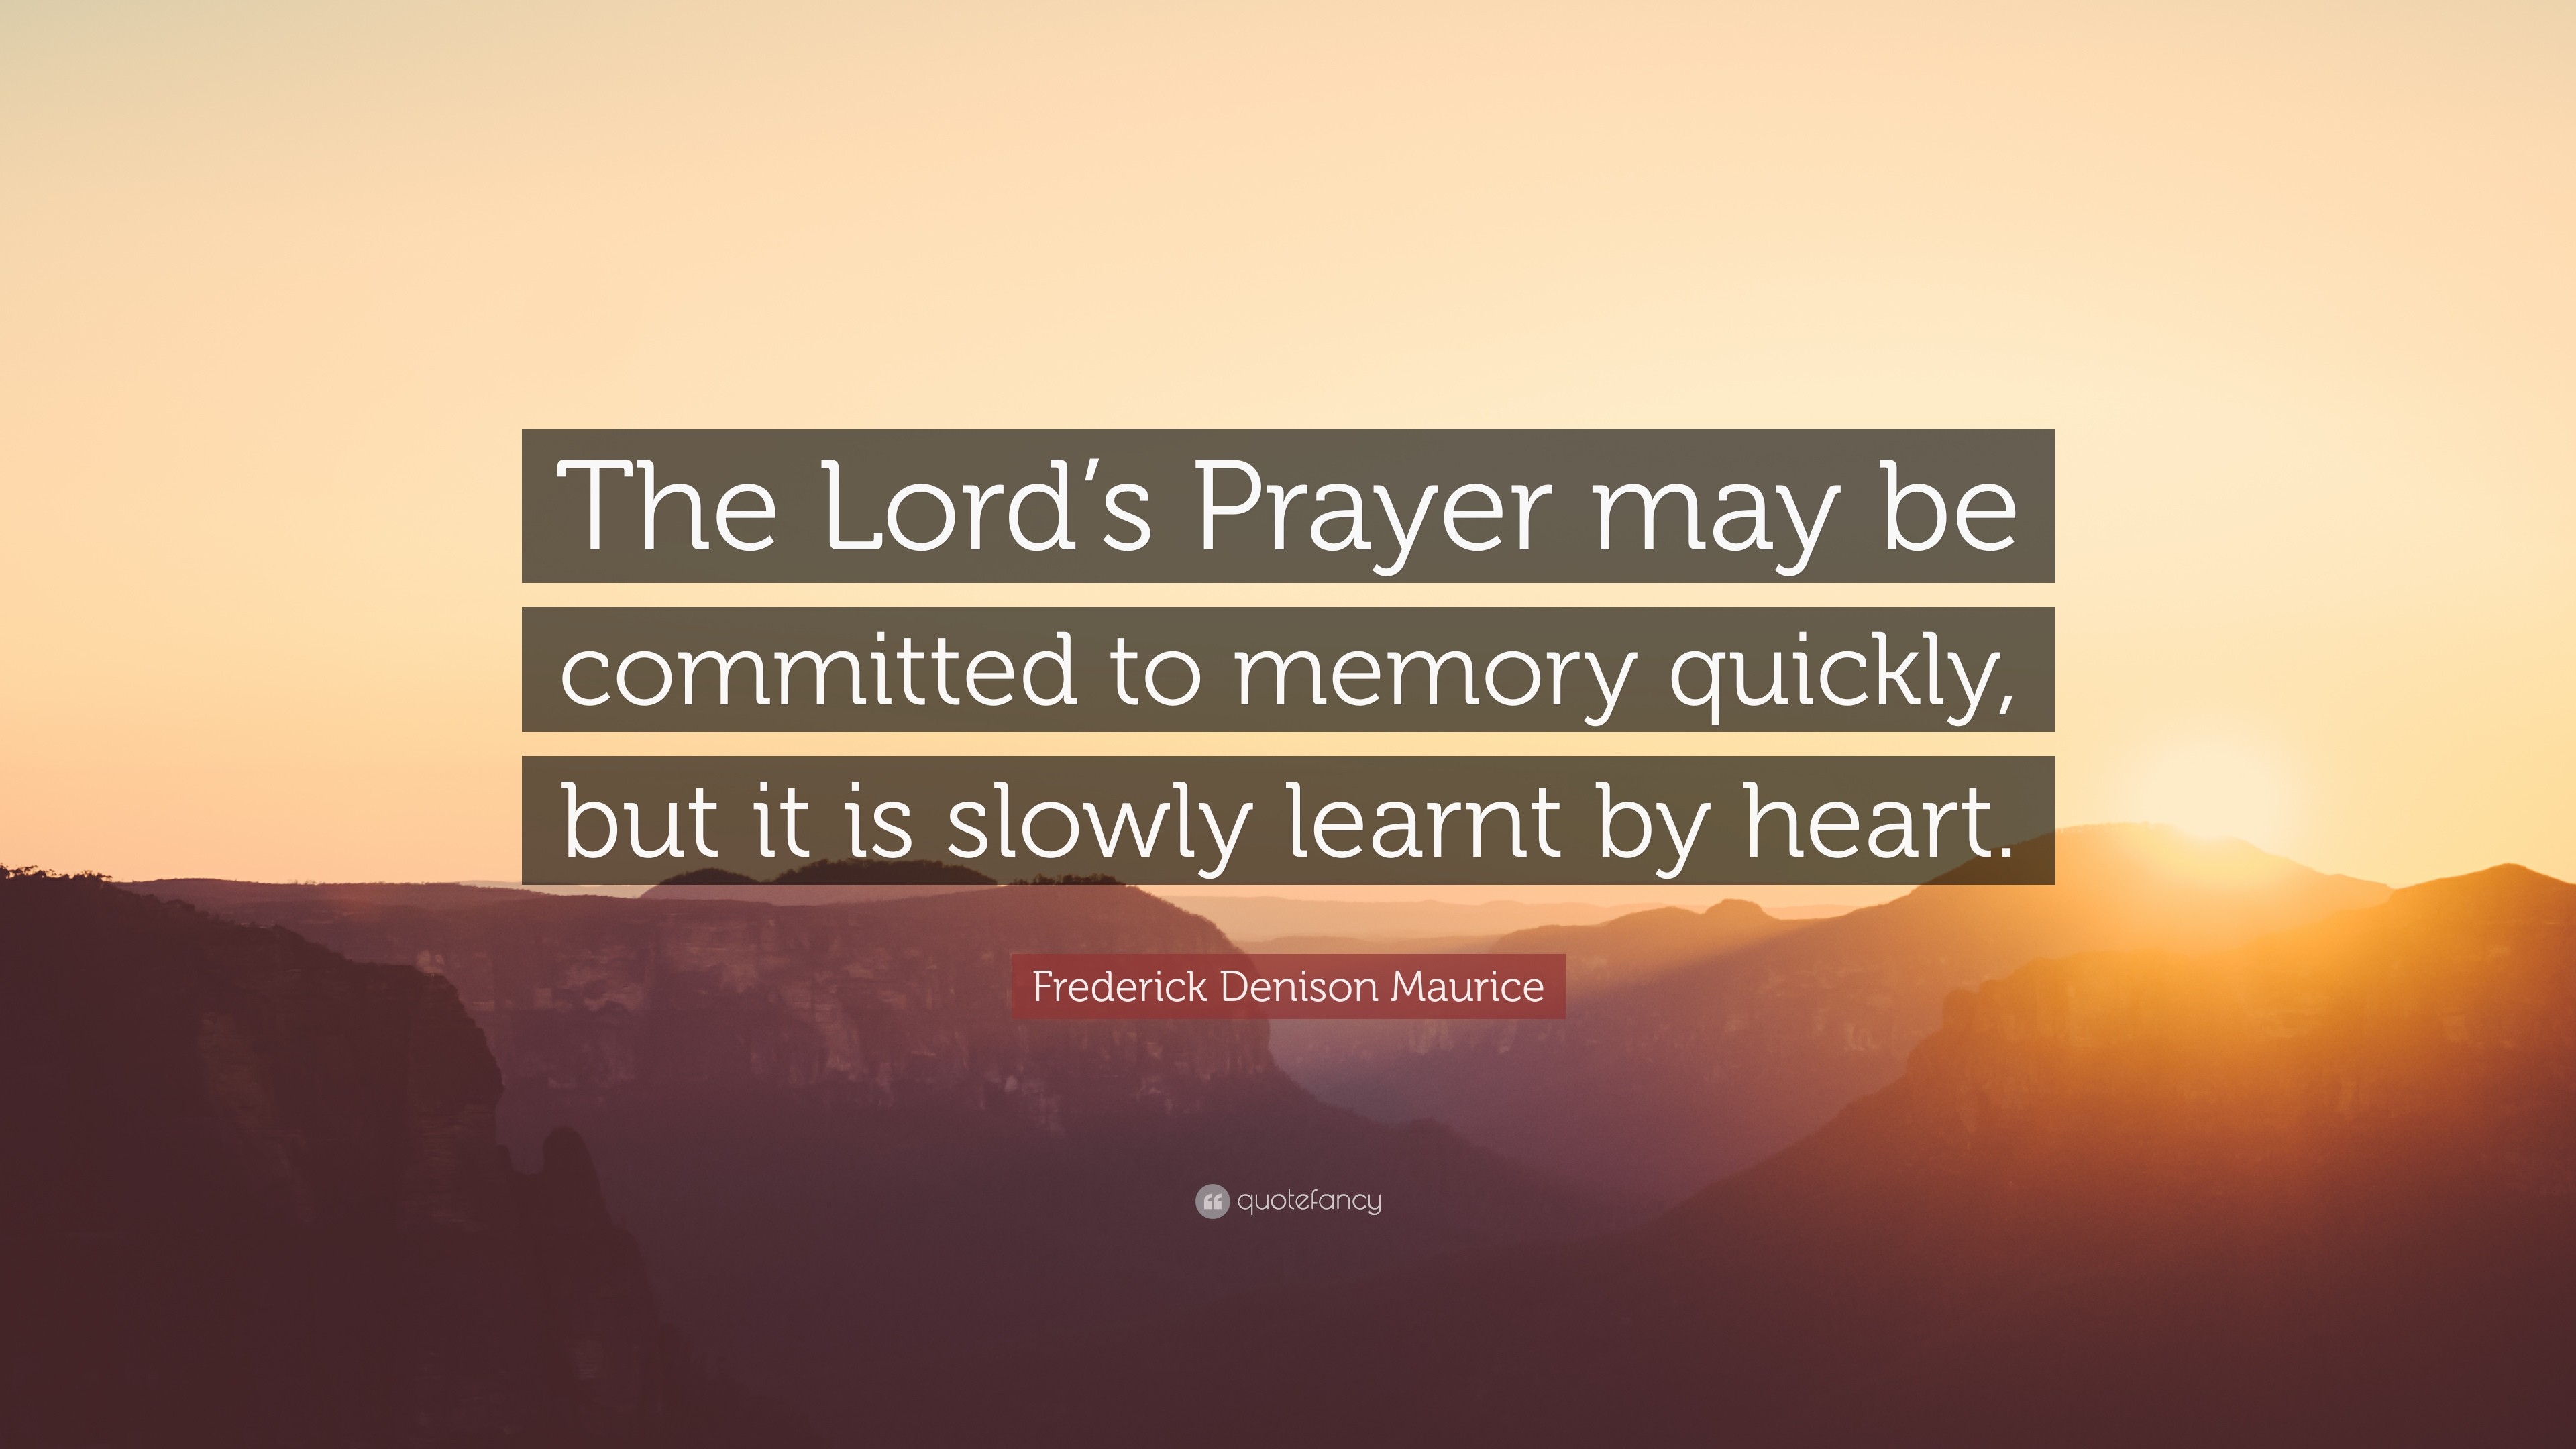 3840x2160 7 wallpapers. Frederick Denison Maurice Quote: “The Lord's Prayer ...